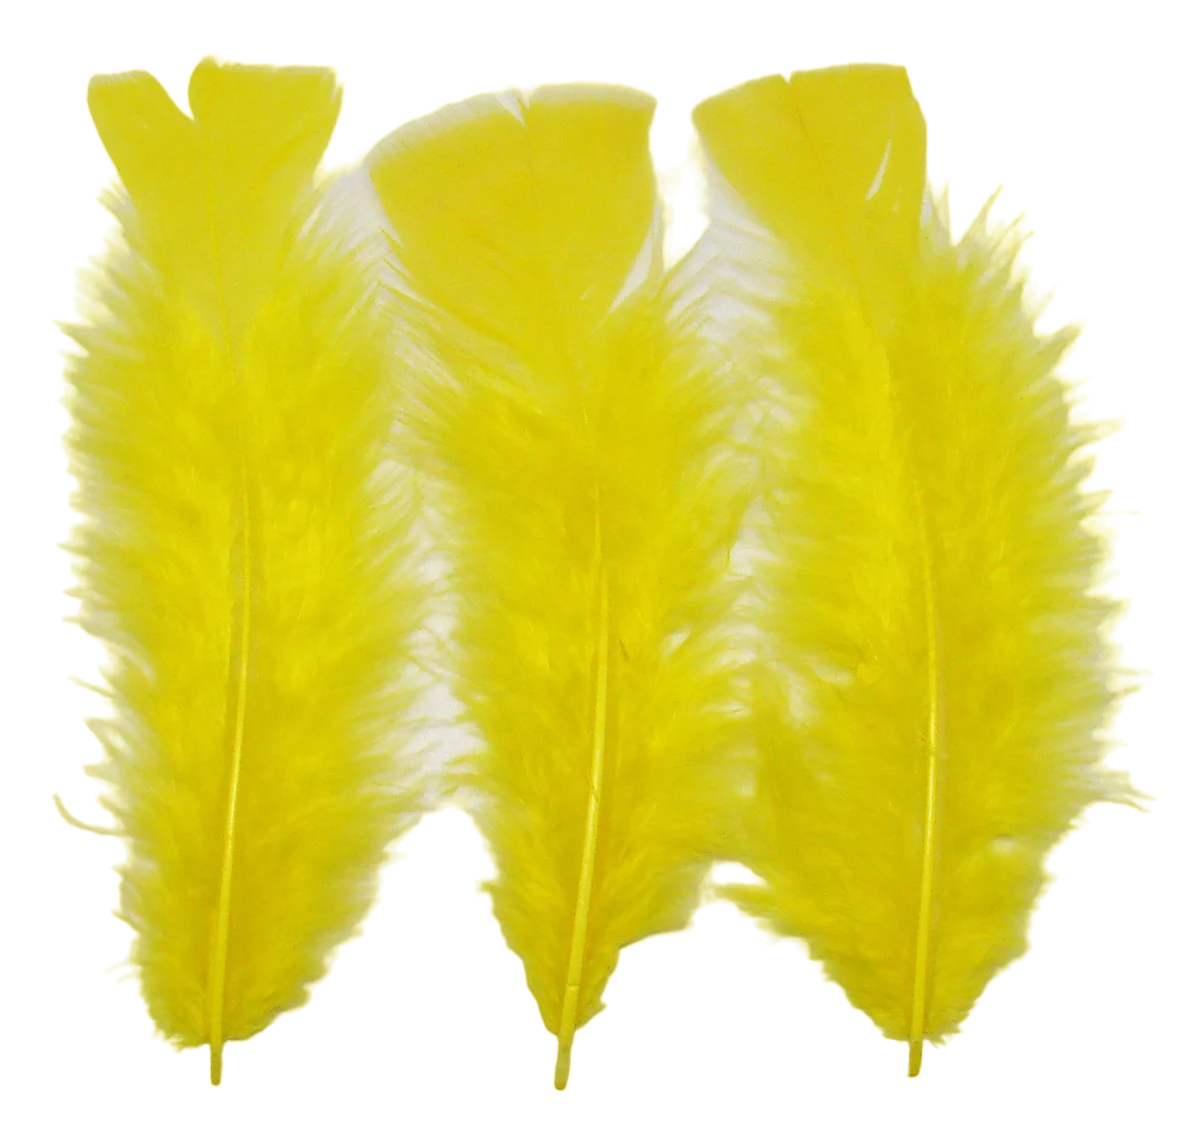 Lot of 12 real yellow feathers on spike, Length of feathers 12cm